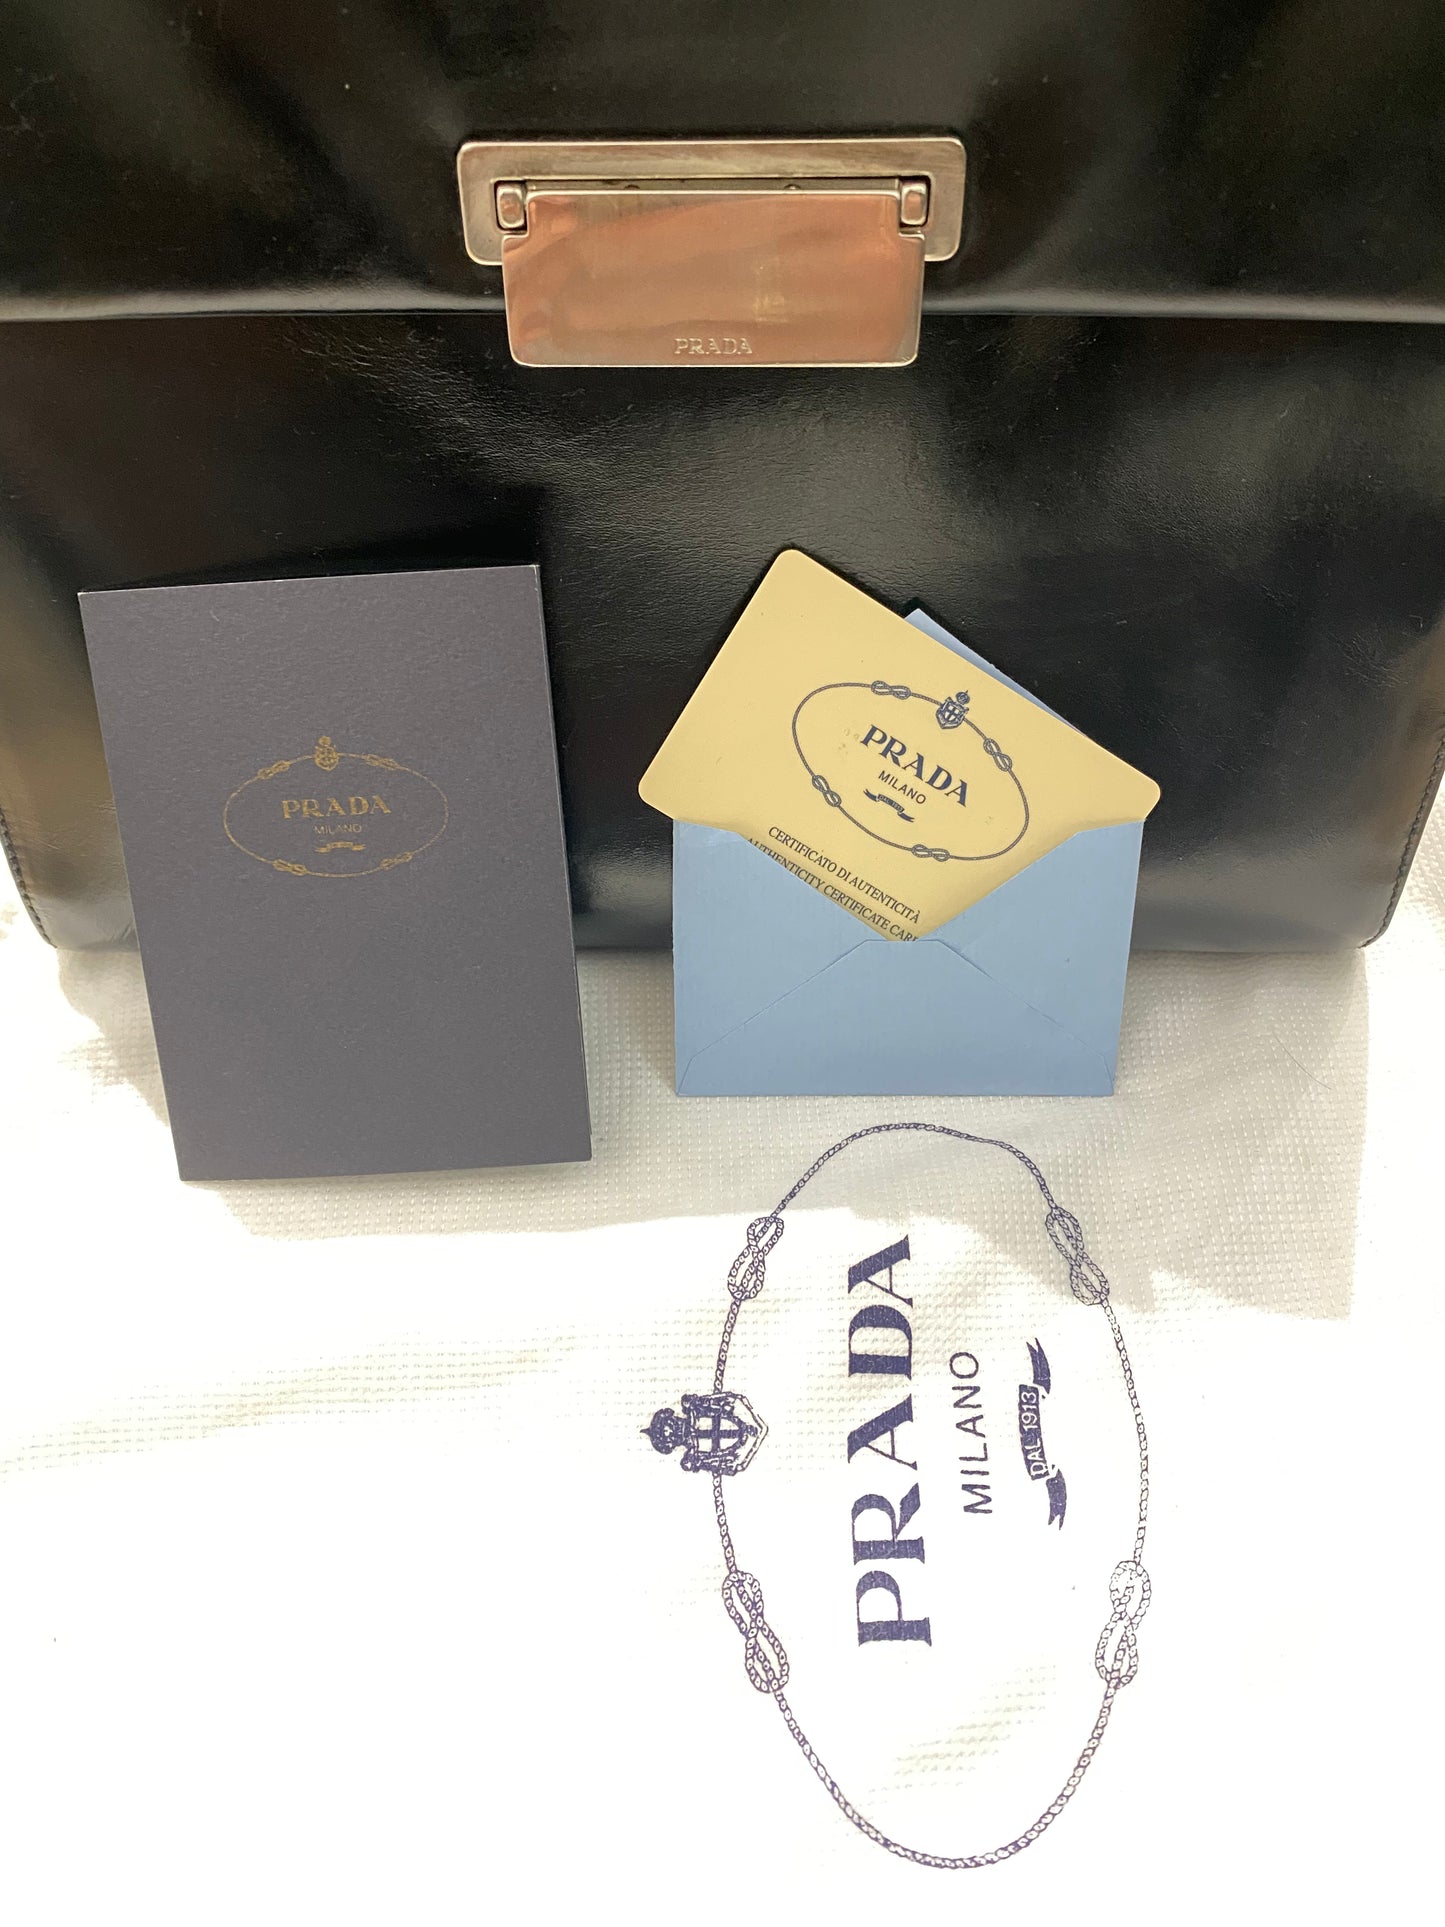 Prada black leather handbag with dustbag and certificates, mint